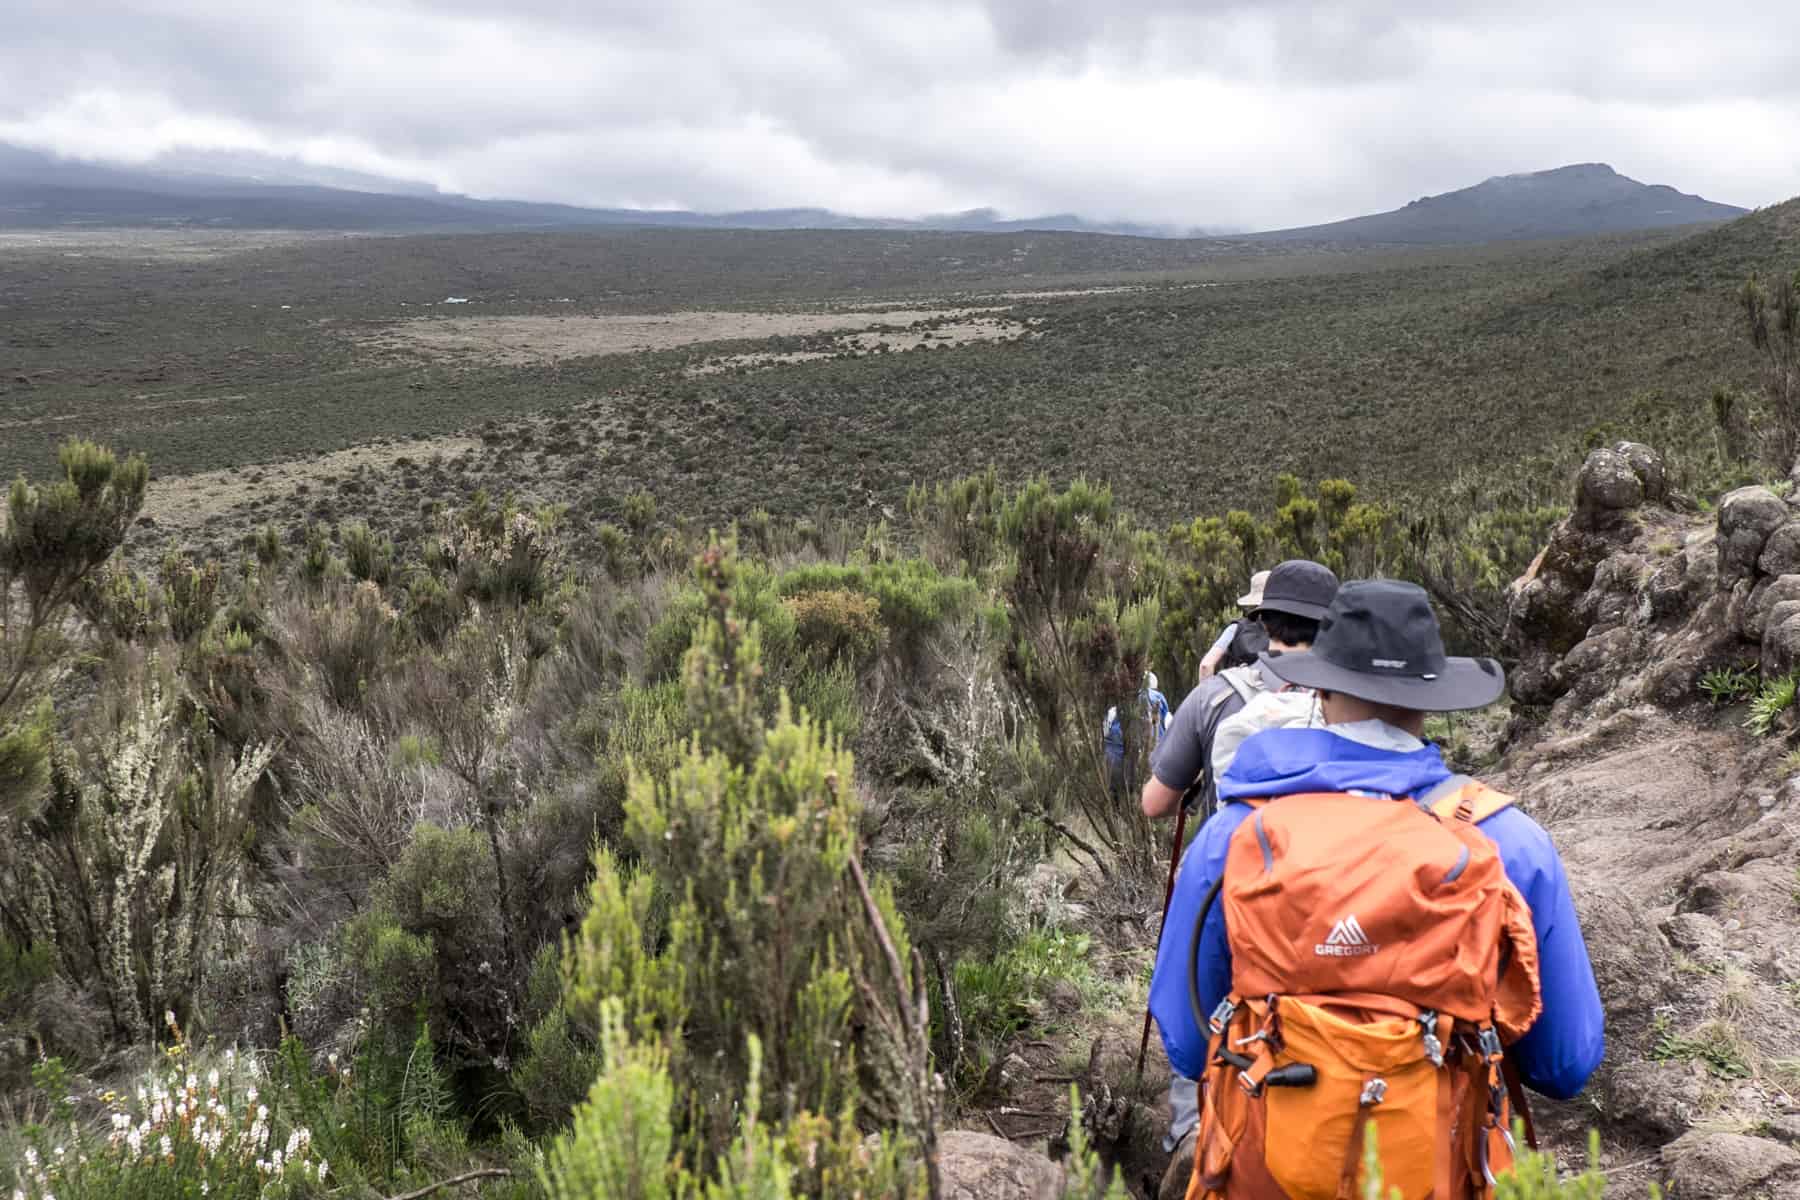 Four trekkers makes there way down a hill through the dry, grassy vegetation in the Moorland Zone of the Kilimanjaro trekking trail